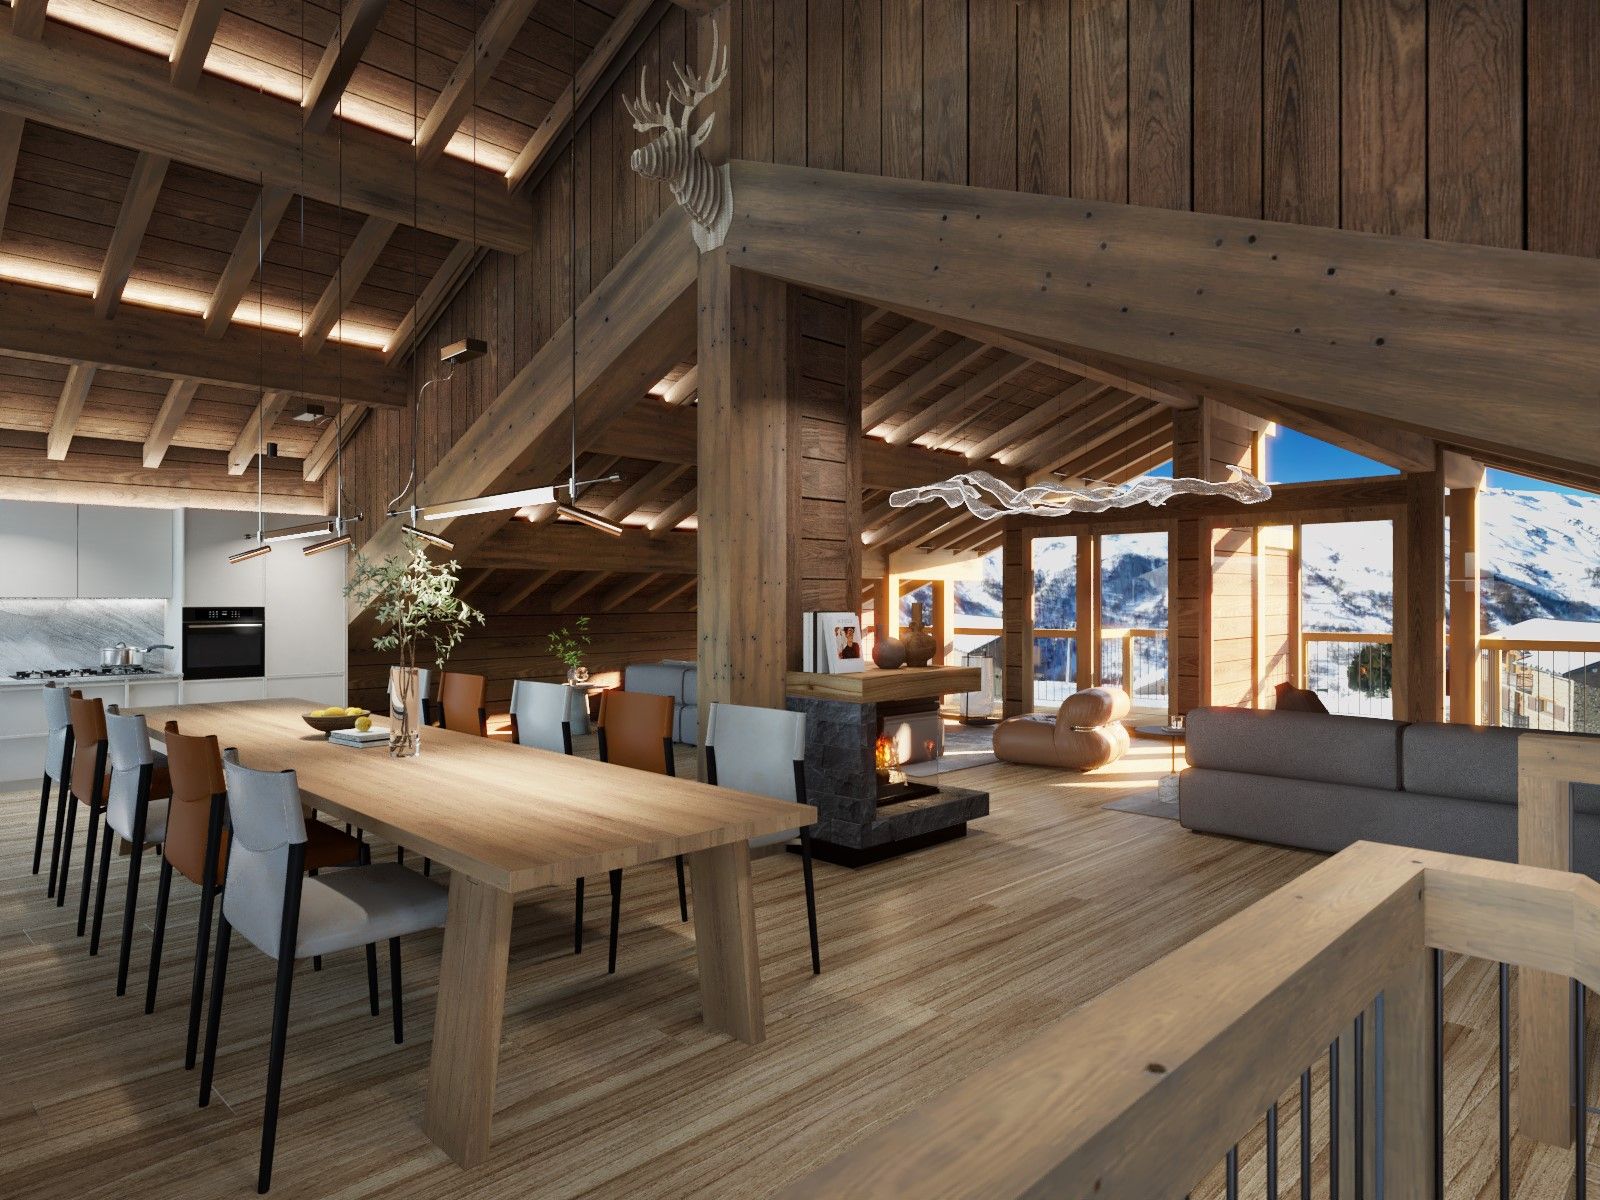 7 bed Chalet For Sale in Three Valleys, French Alps